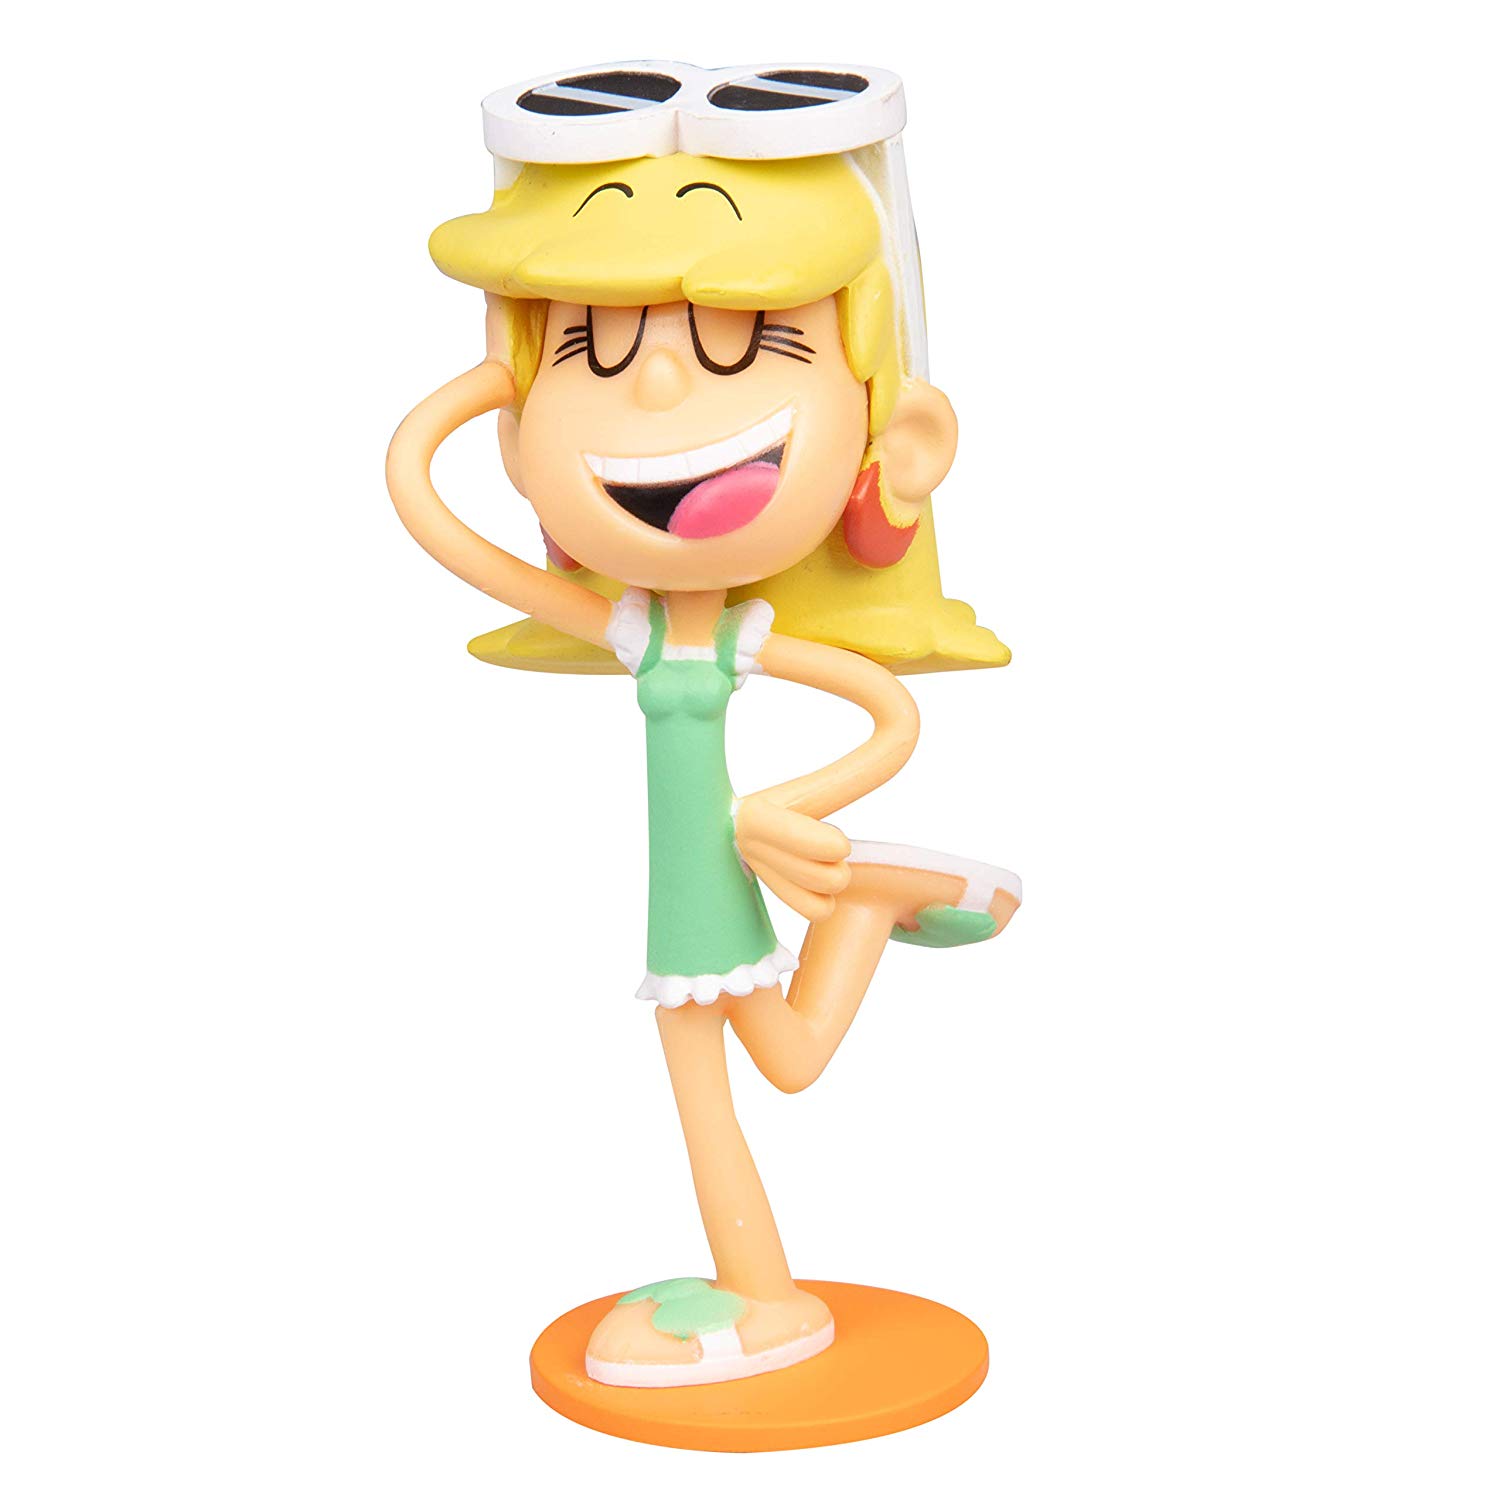 Lori Leni Lily Lincoln Lisa Clyde The Loud House Figure 8 Pack ... Lucy  Toys & Hobbies fzgil Action Figures